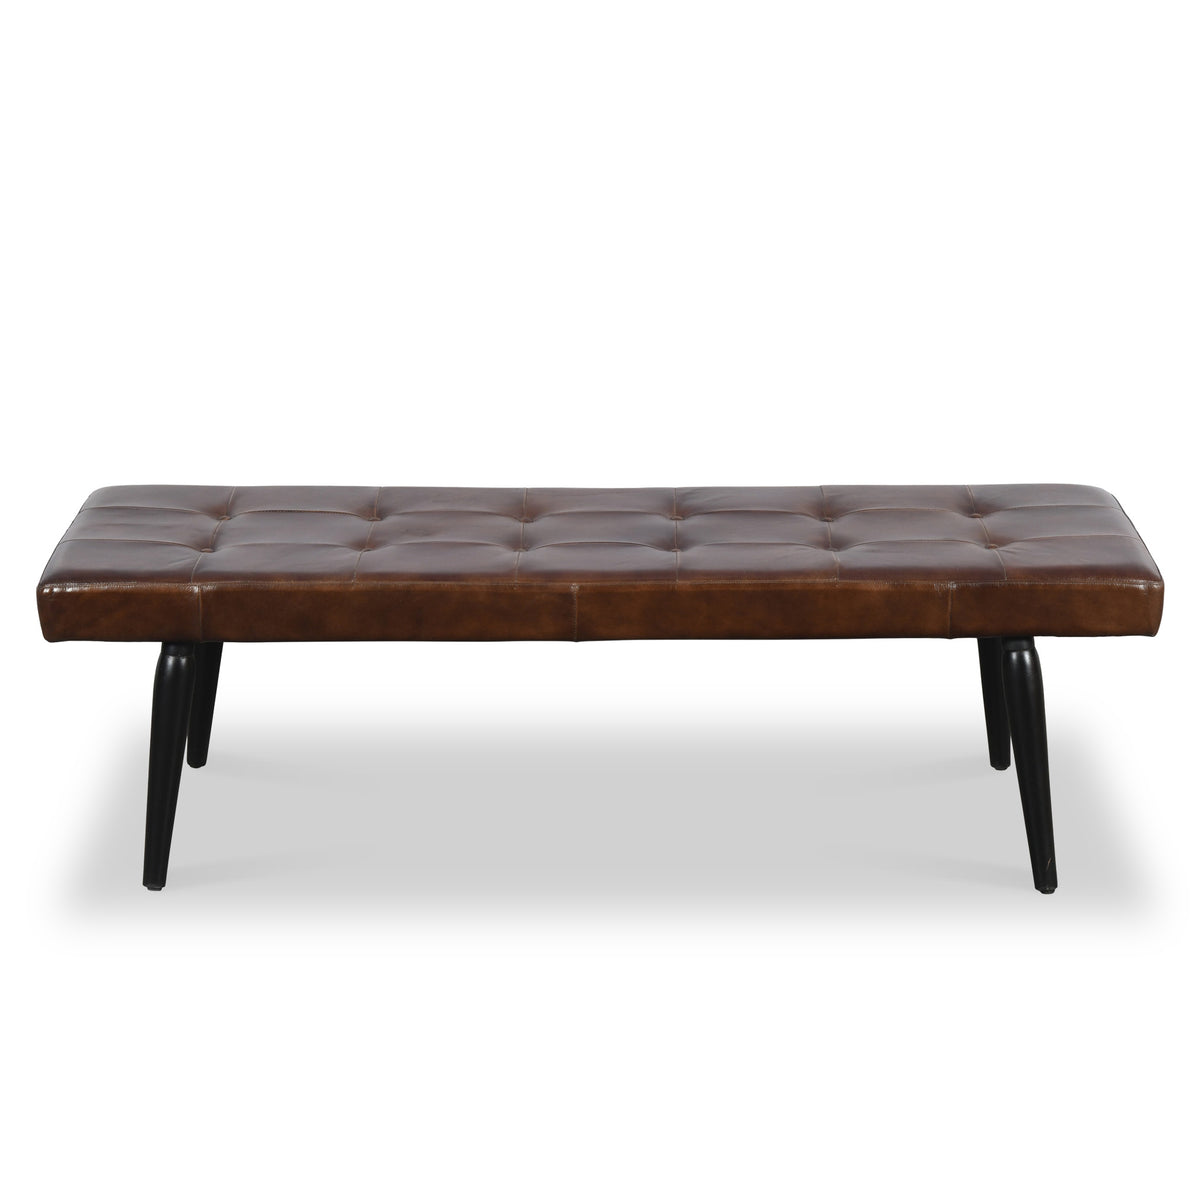 Ramsley Leather 150cm Bench from Roseland